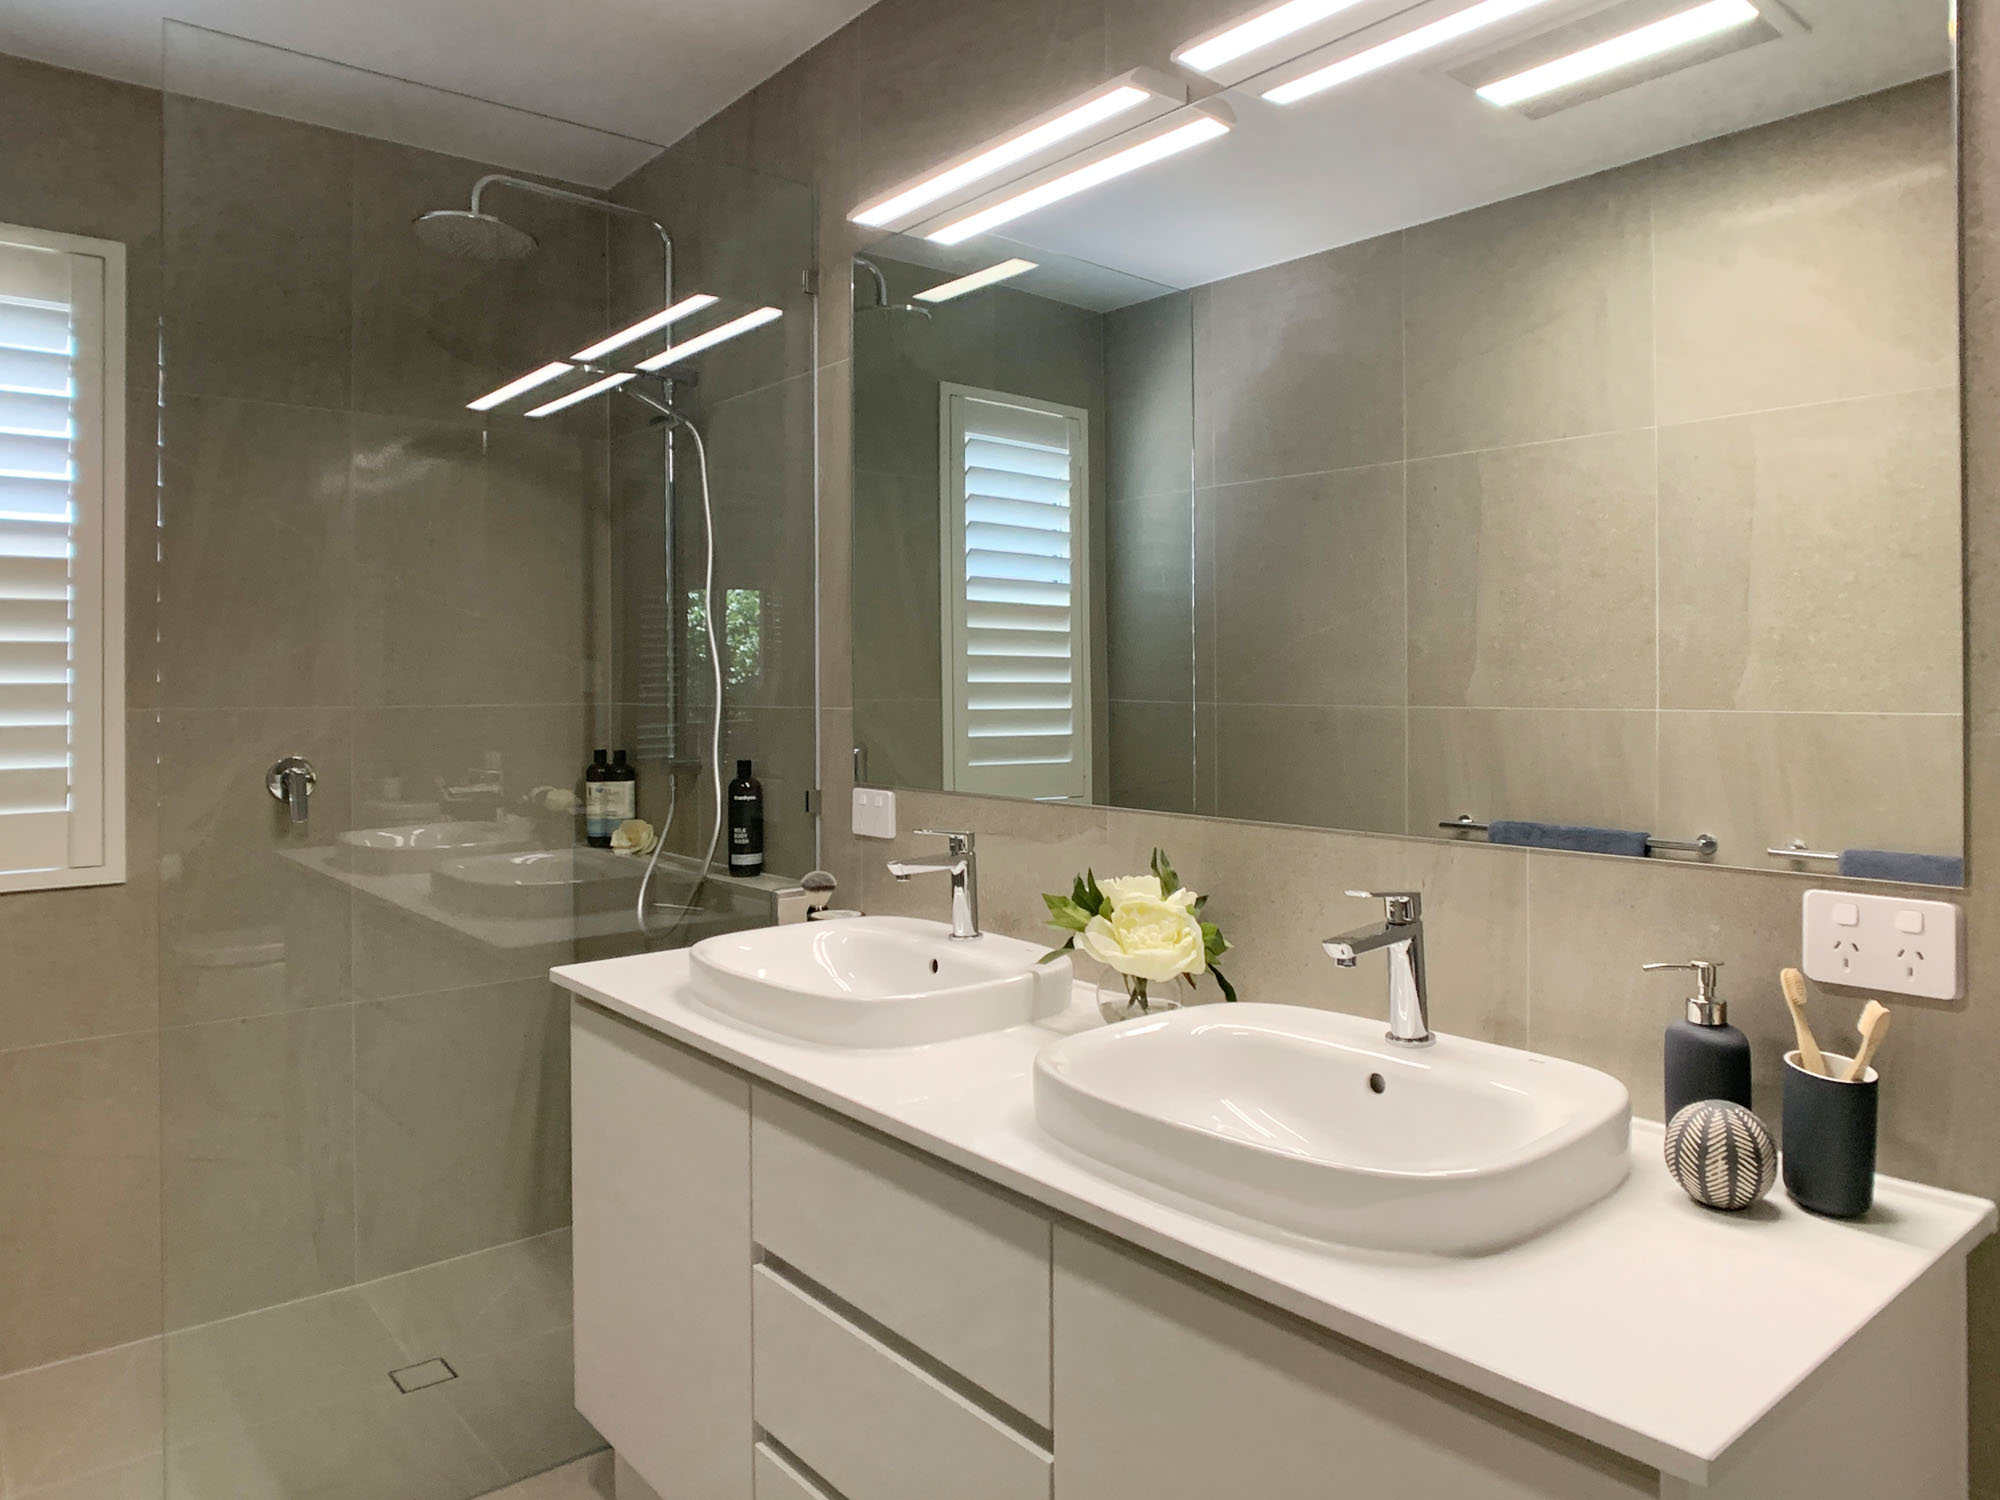 Double Vanity and Towel Rails - Extra large mirror with overhead LED Lighting